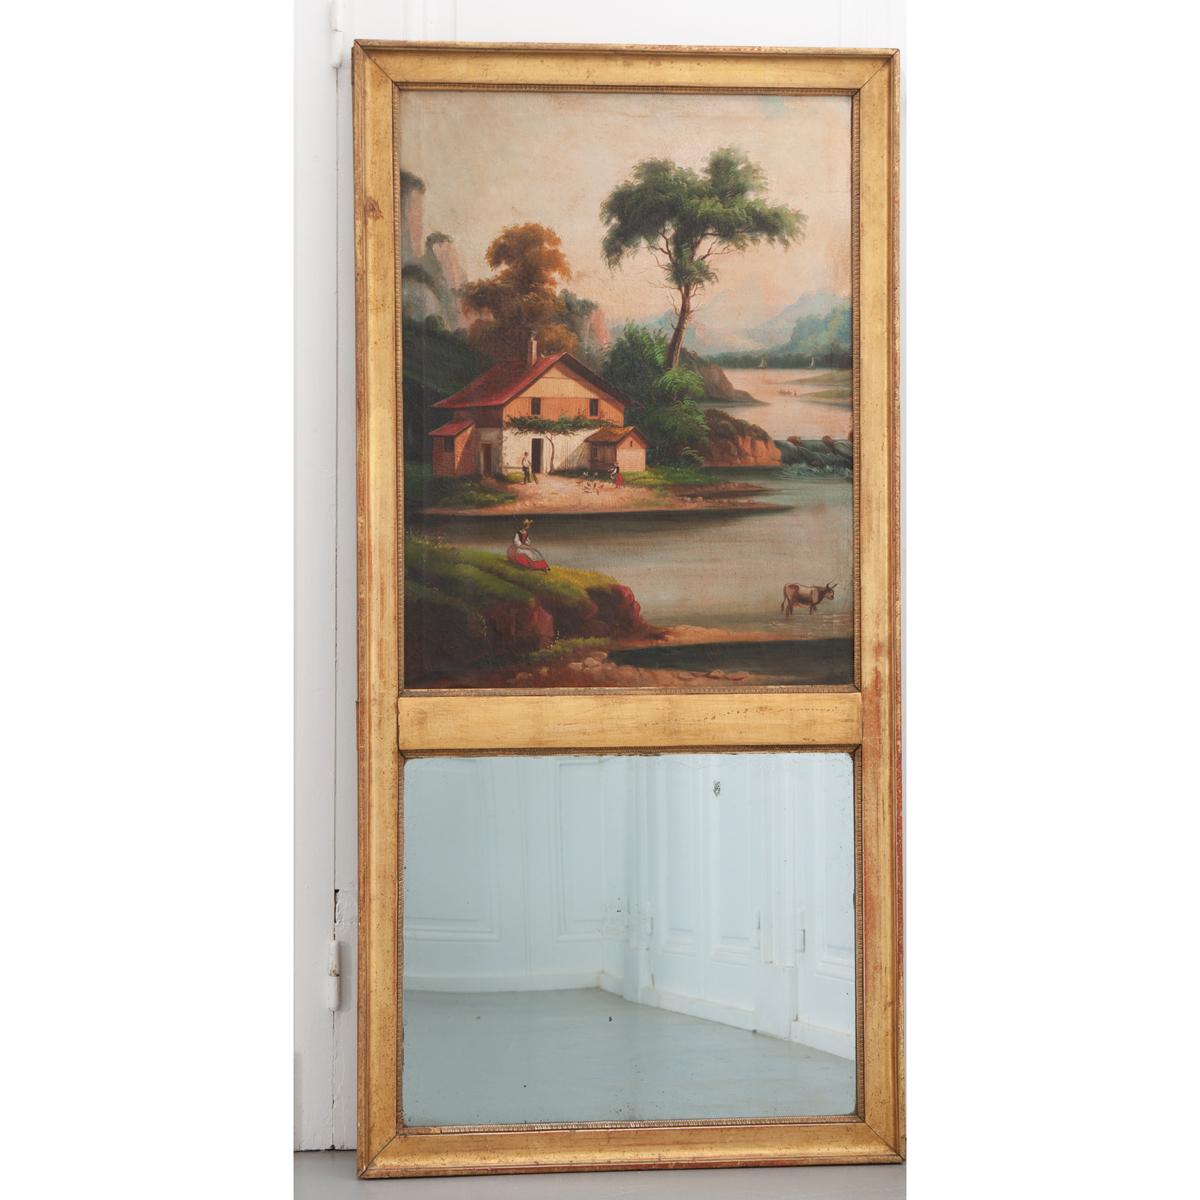 A wonderful giltwood trumeau with lovely oil painting on canvas and original mirror with foxing. The gold frame has some red bole showing through the finish and a lambs tongue detail around the mirror and painting. The painting has beautiful